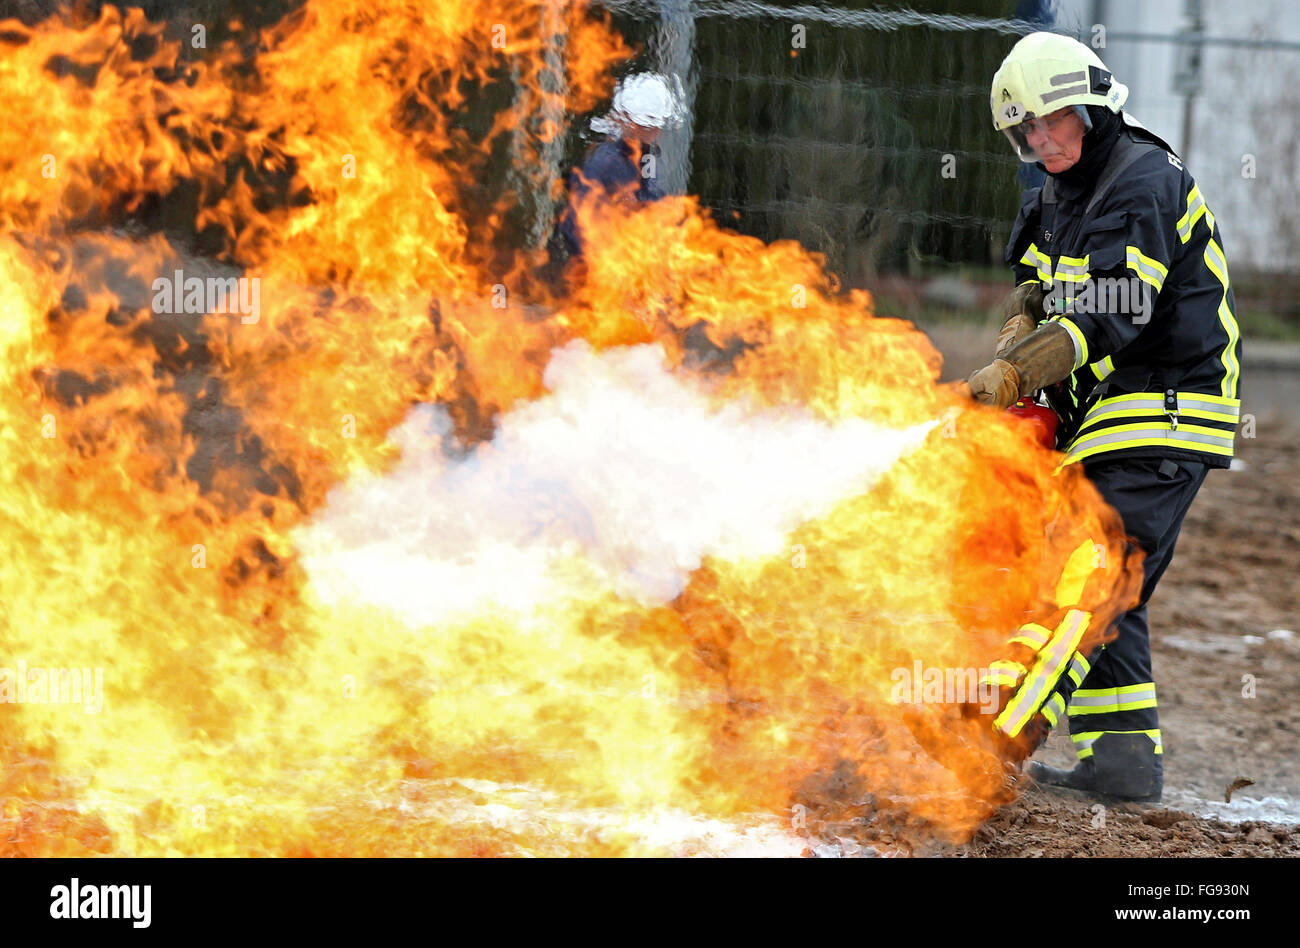 A firefighter puts out a burning gas line during training drills in Leipzig, Germany, 18 February 2016. Netz Leipzig GmbH - responsible for the gas grid in the Leipzig municipal works - drilled an accident on their 1,000km-long gas grid with the fire department. These drills are intended to help avoid catastrophes like the gas explosion in 23 October 2014 in Ludwigshafen, in which two people were killed and a tram was destroyed. Photo: JAN WOITAS/dpa Stock Photo